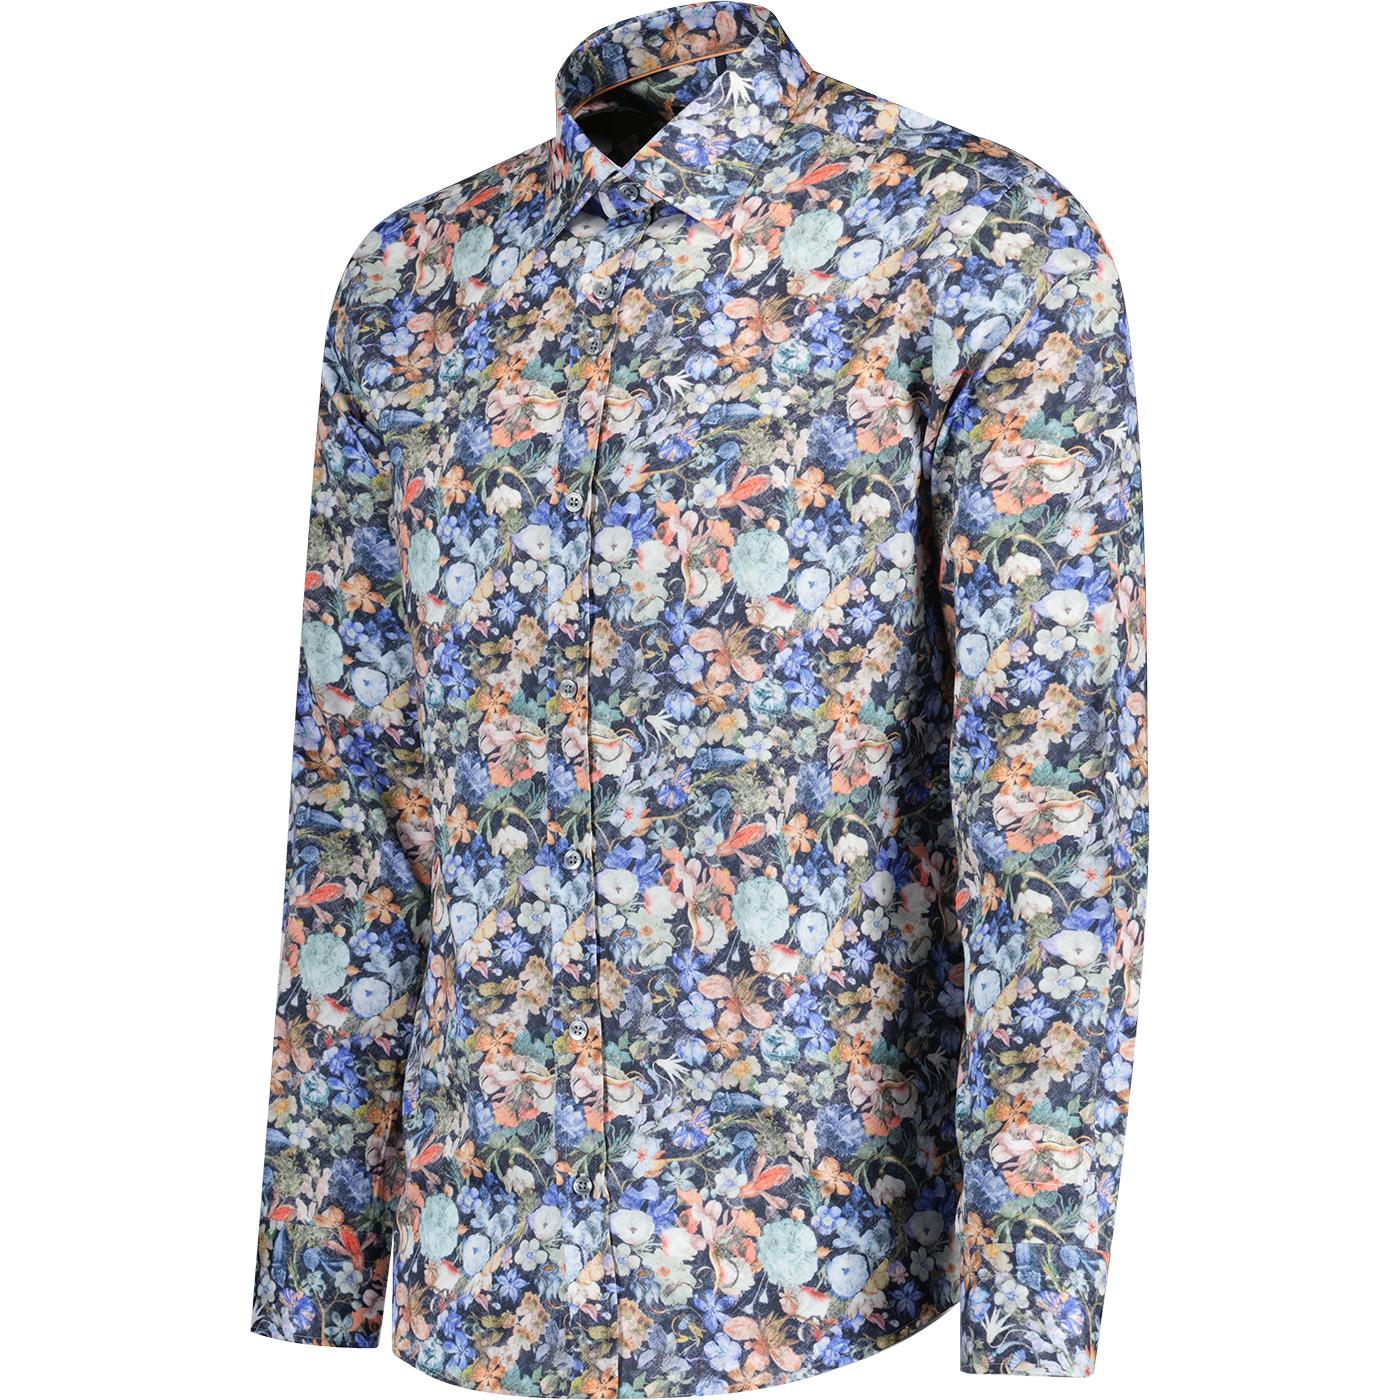 Guide London Retro Multi Floral Long Sleeve Shirt in Navy